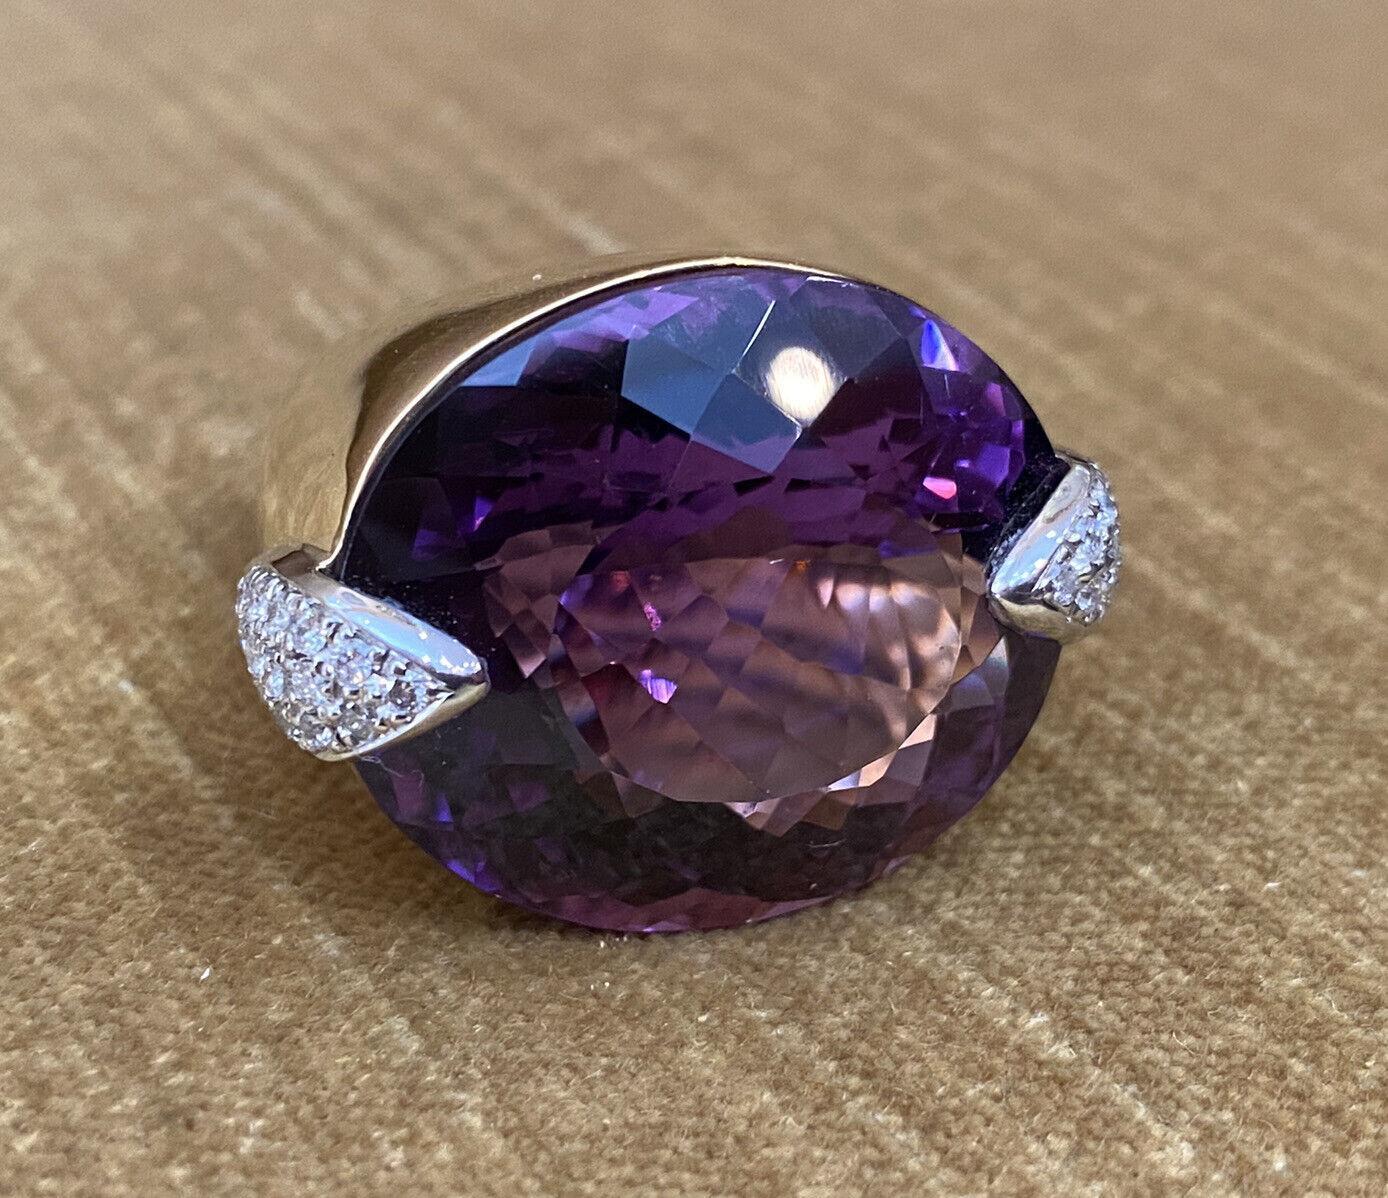 Oval Cut Large 54.03 carats Amethyst and Diamond Cocktail Ring in Platinum and 18k Gold For Sale